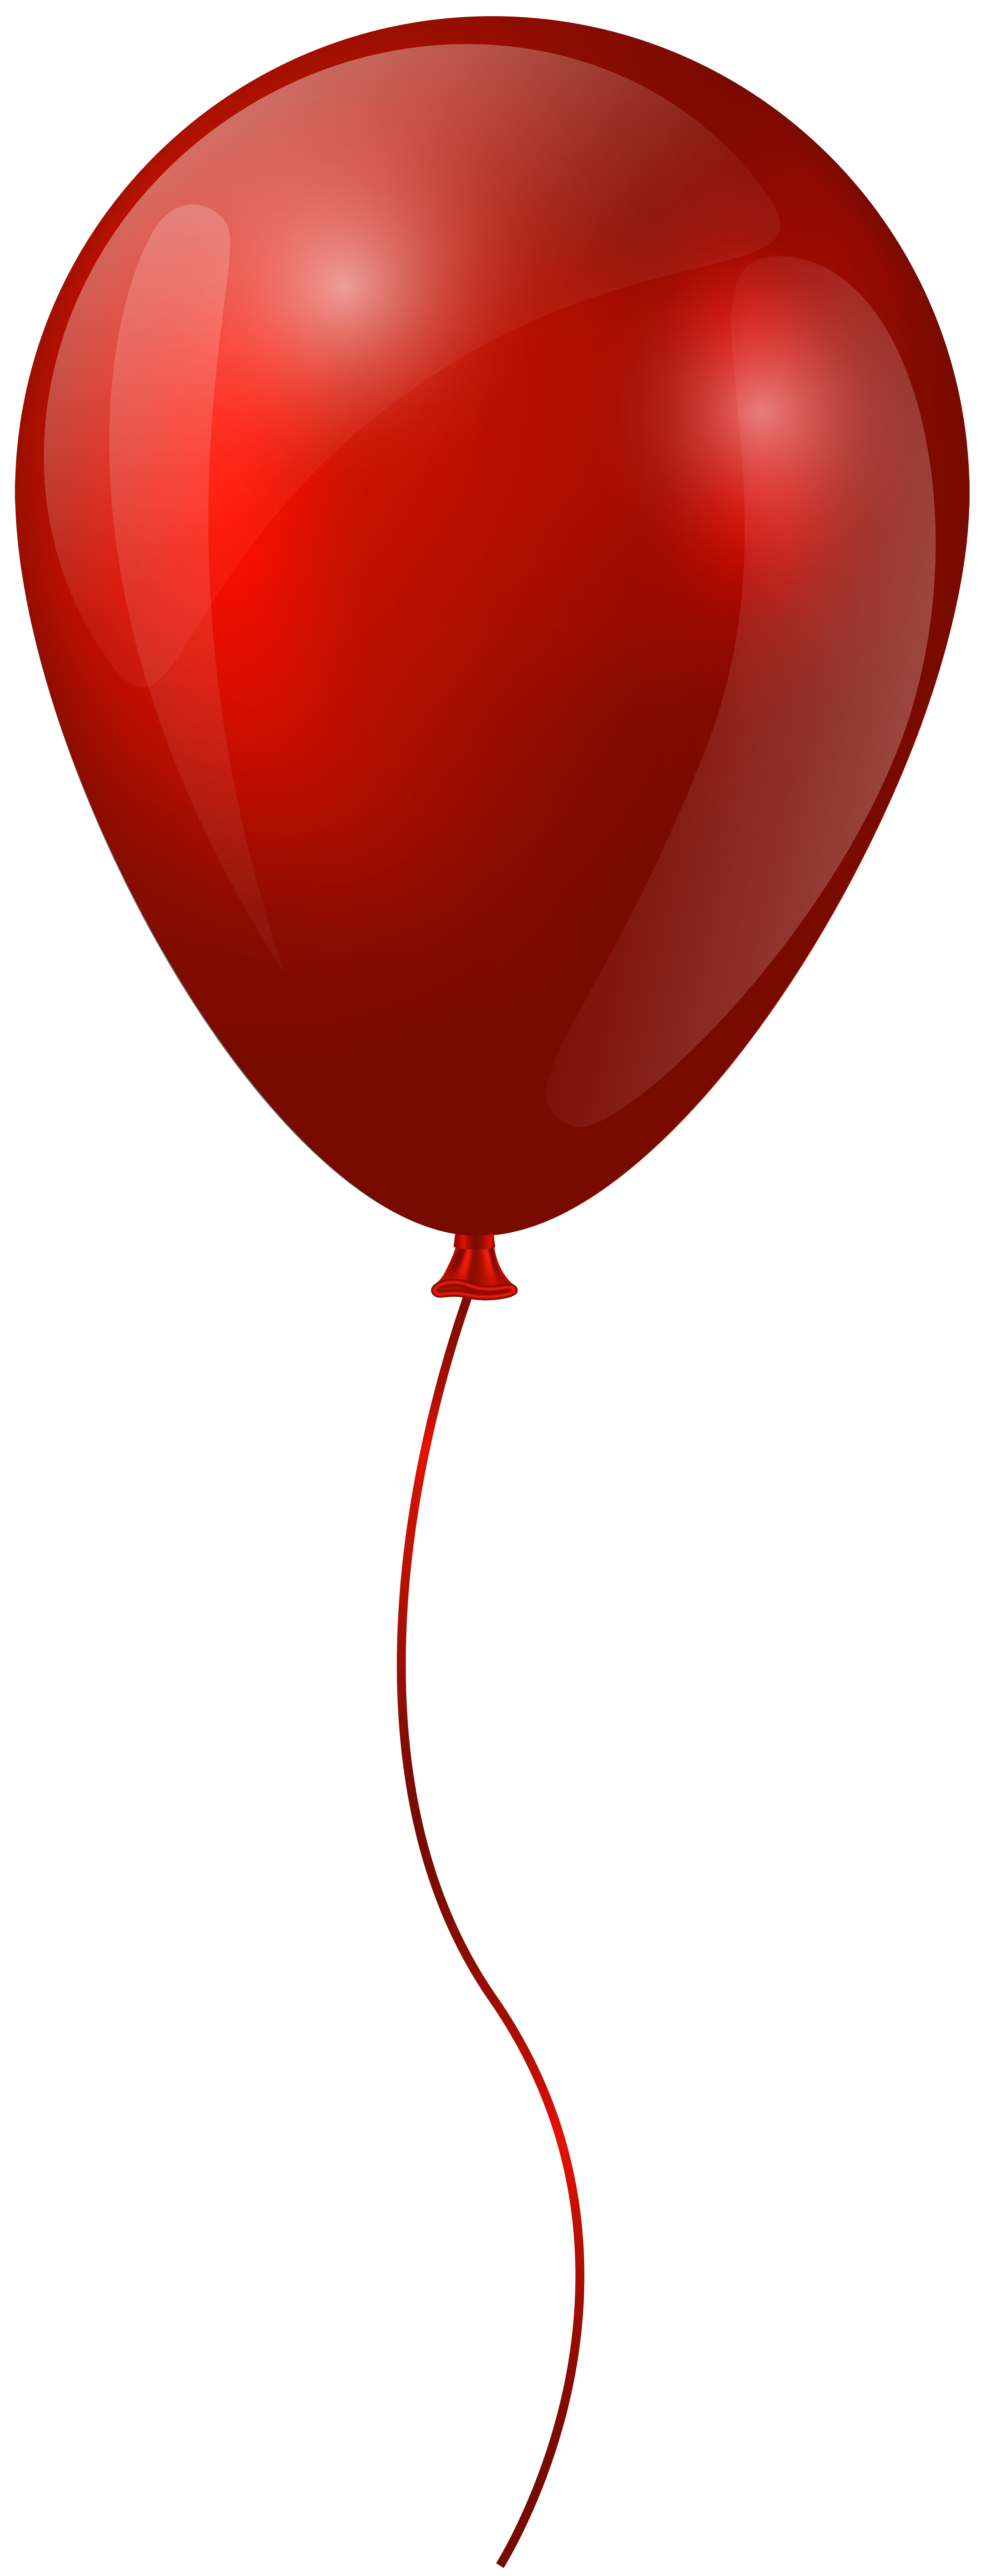 Red Balloon Transparent Clip Art | Gallery Yopriceville - High-Quality